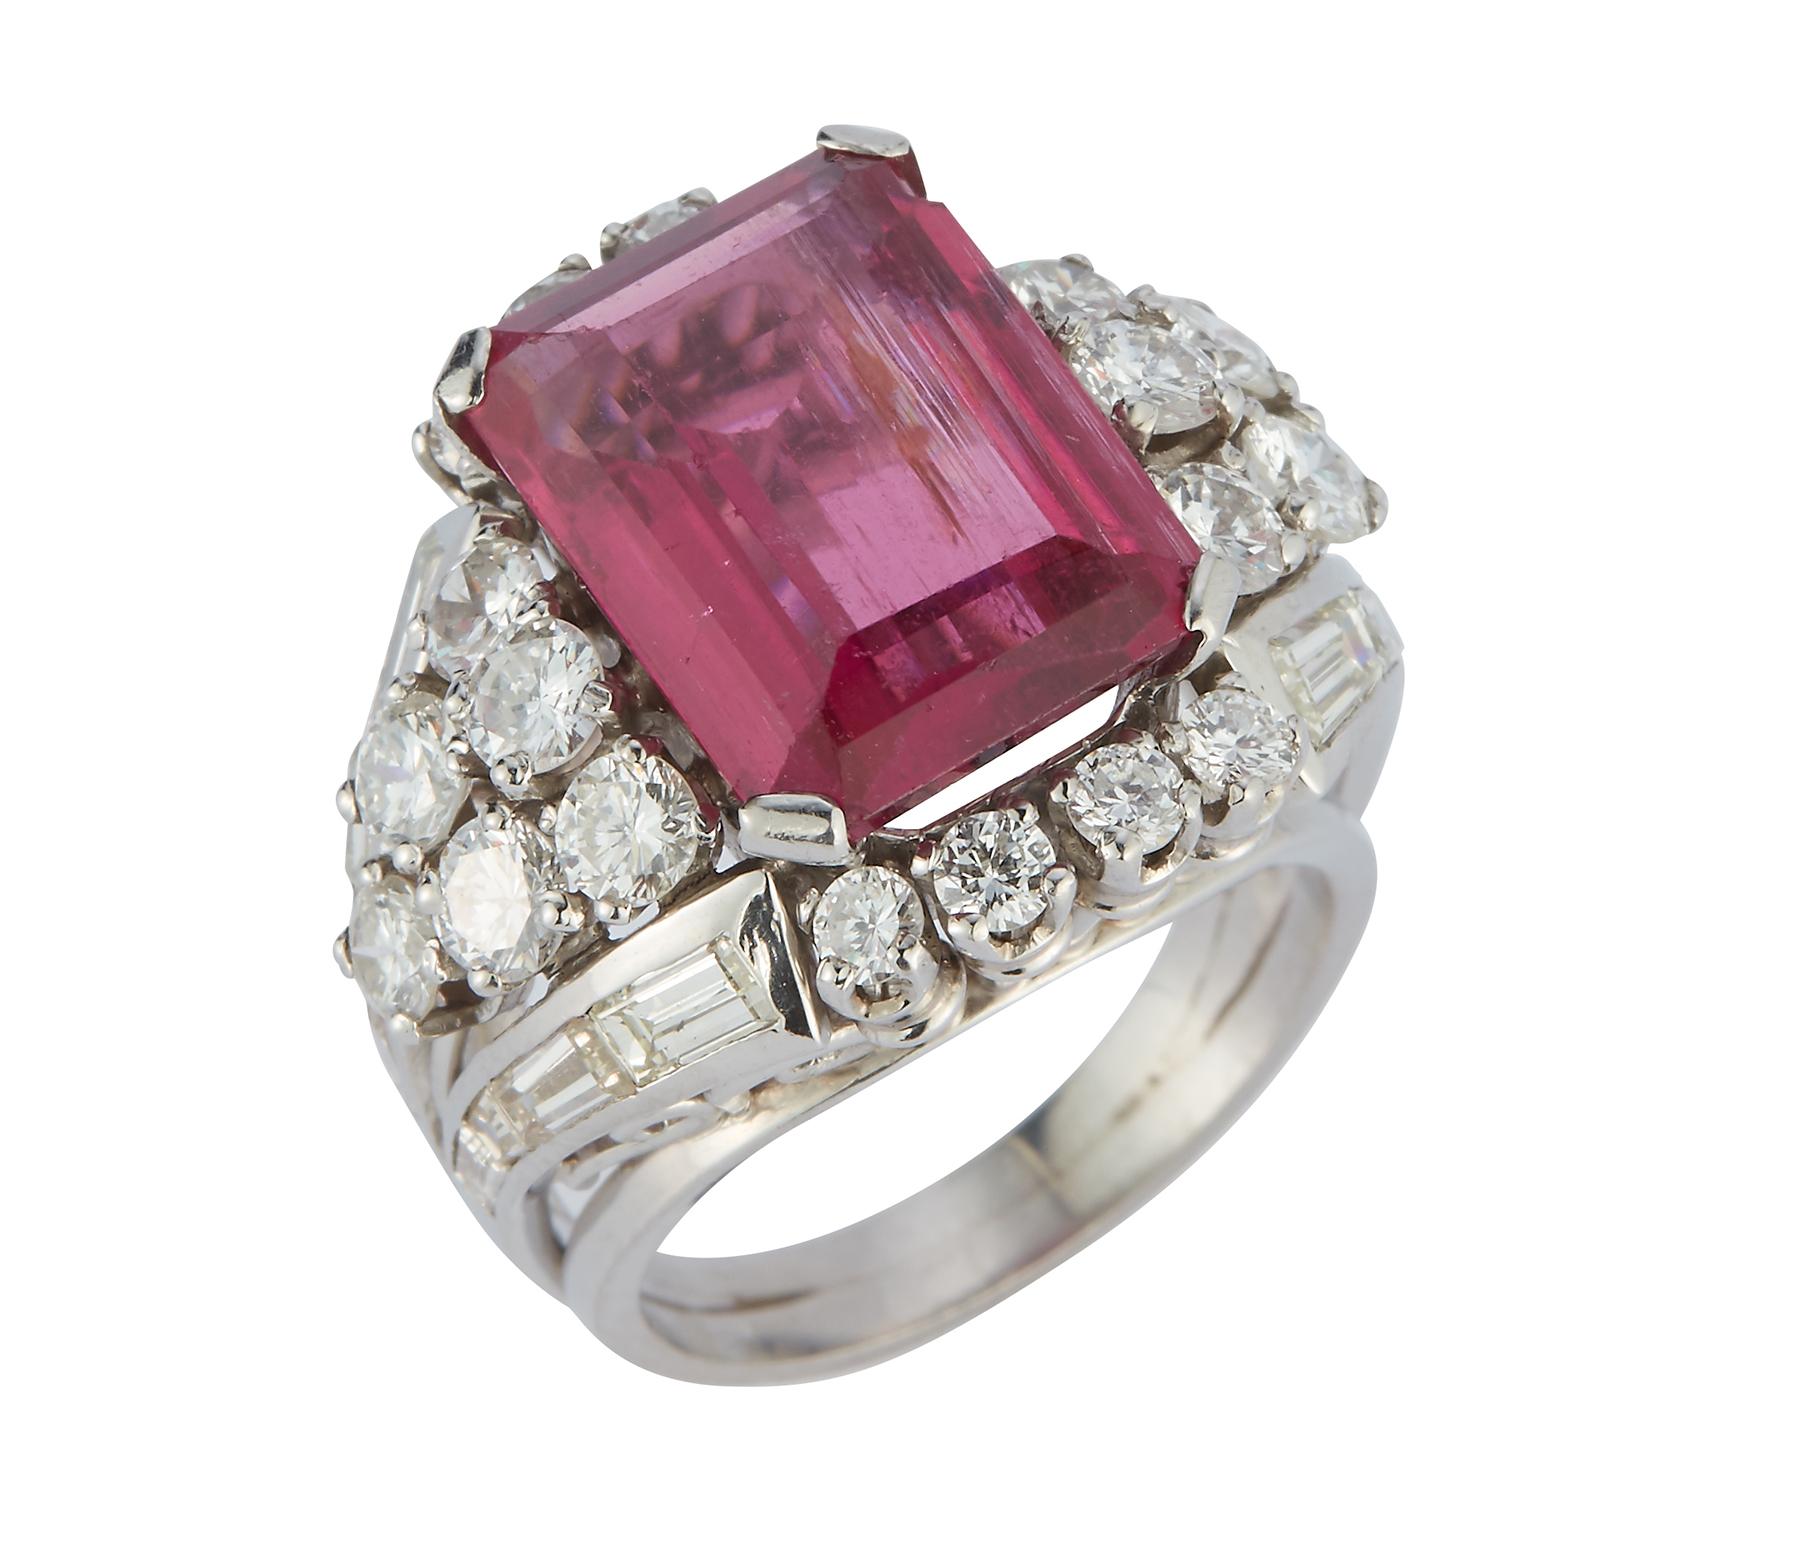 Rubelite and Diamond Cocktail Ring

Rubelite weight approx 9.33 ct

Ring Size: 6.5

Sizable to any ring size